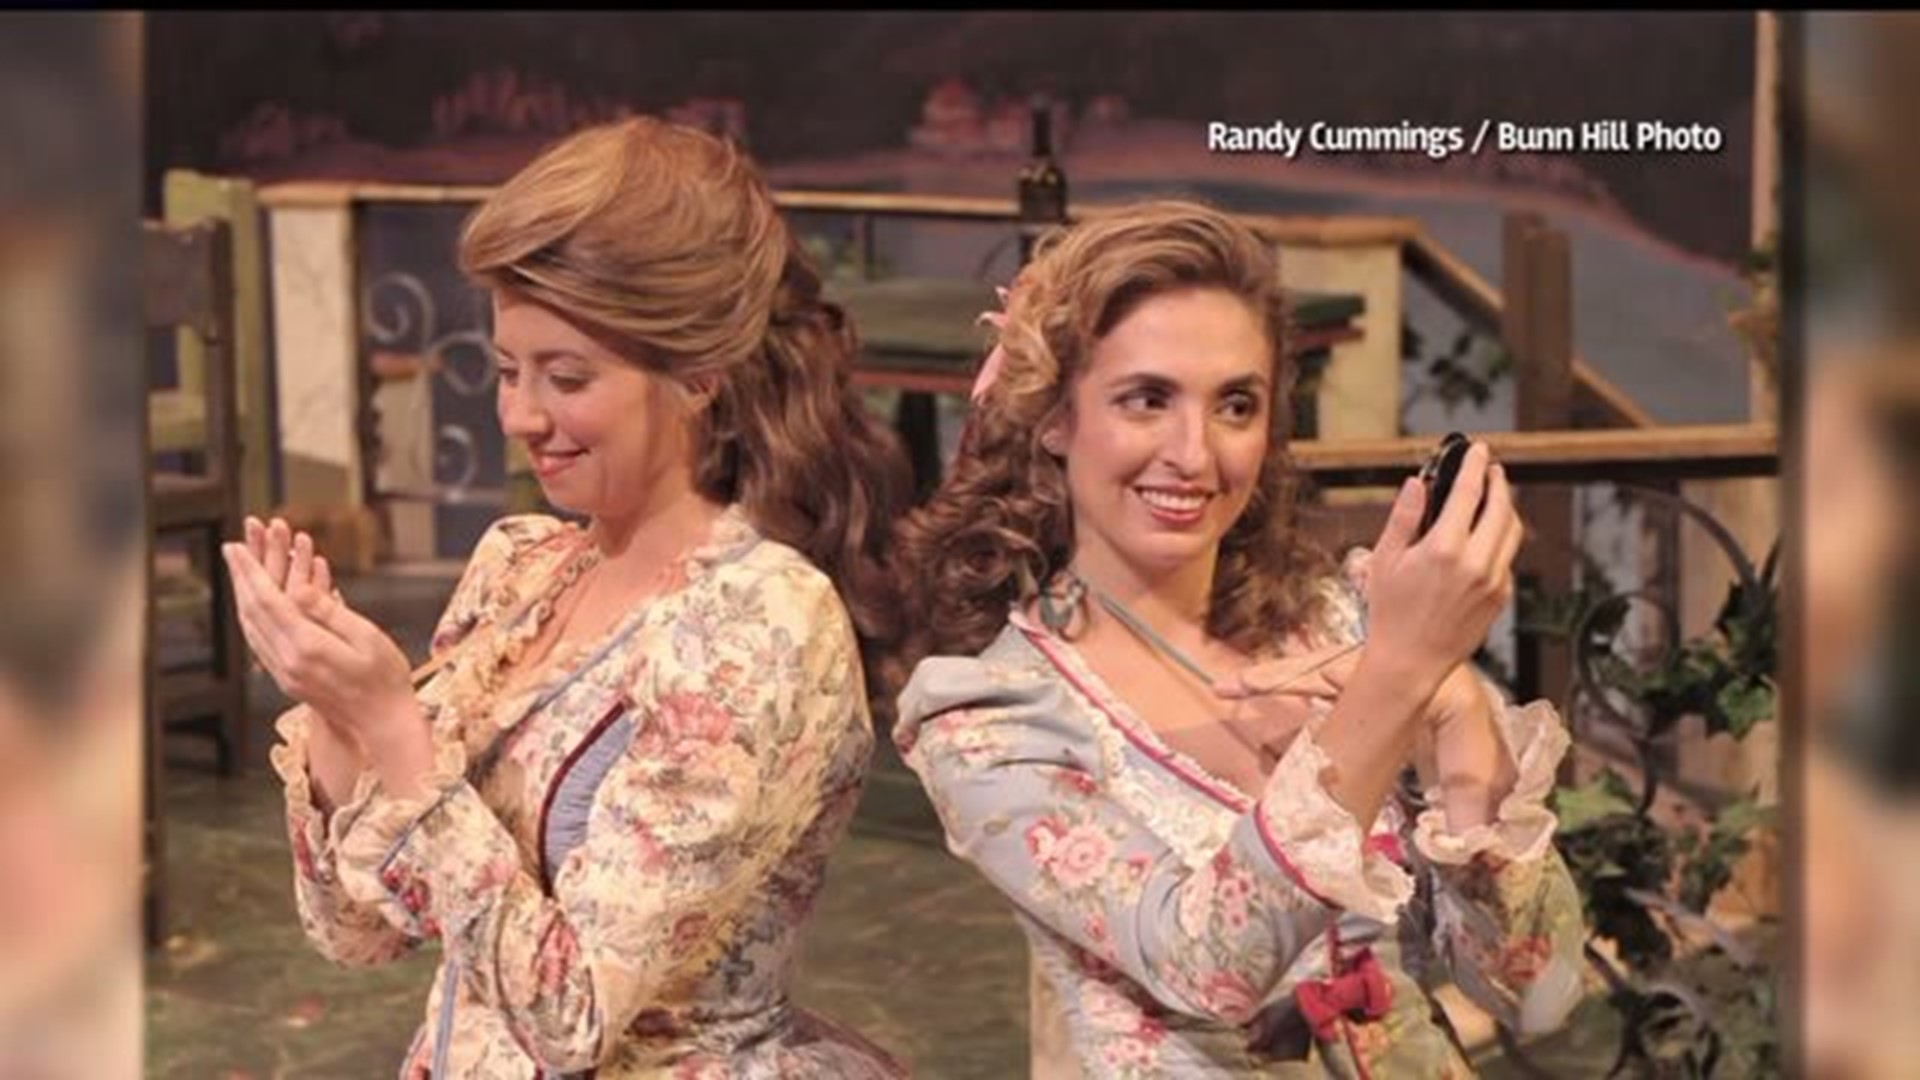 York Symphony Orchestra stops by the set to preview "Cosi fan tutte"